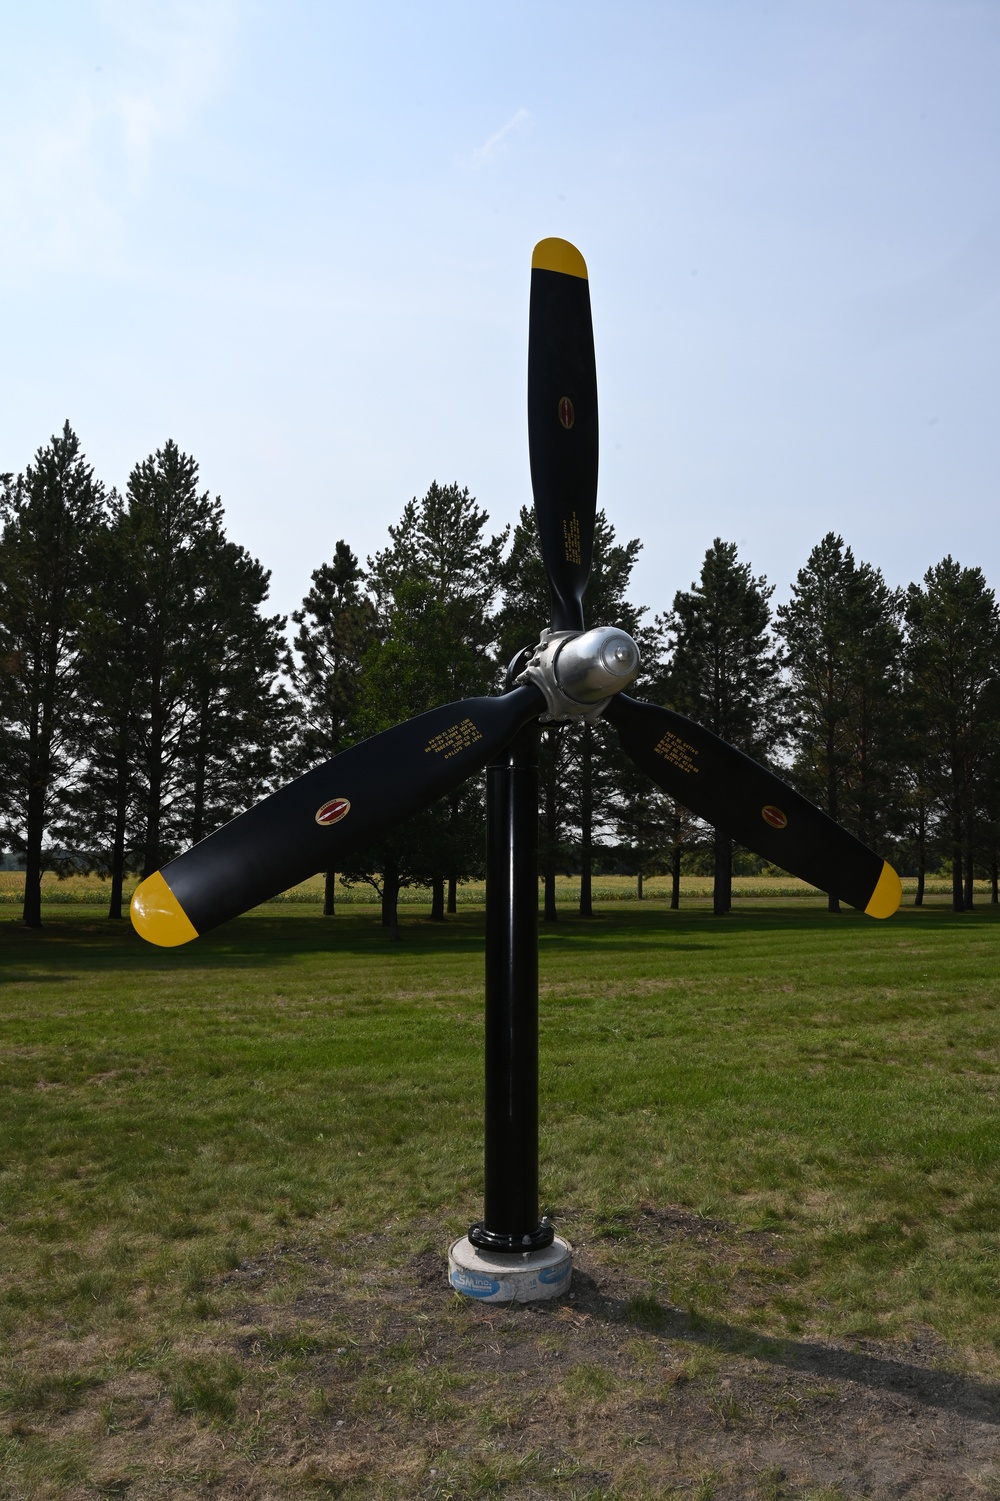 U.S. Air Force Themed display installed at the North Dakota Veterans Home